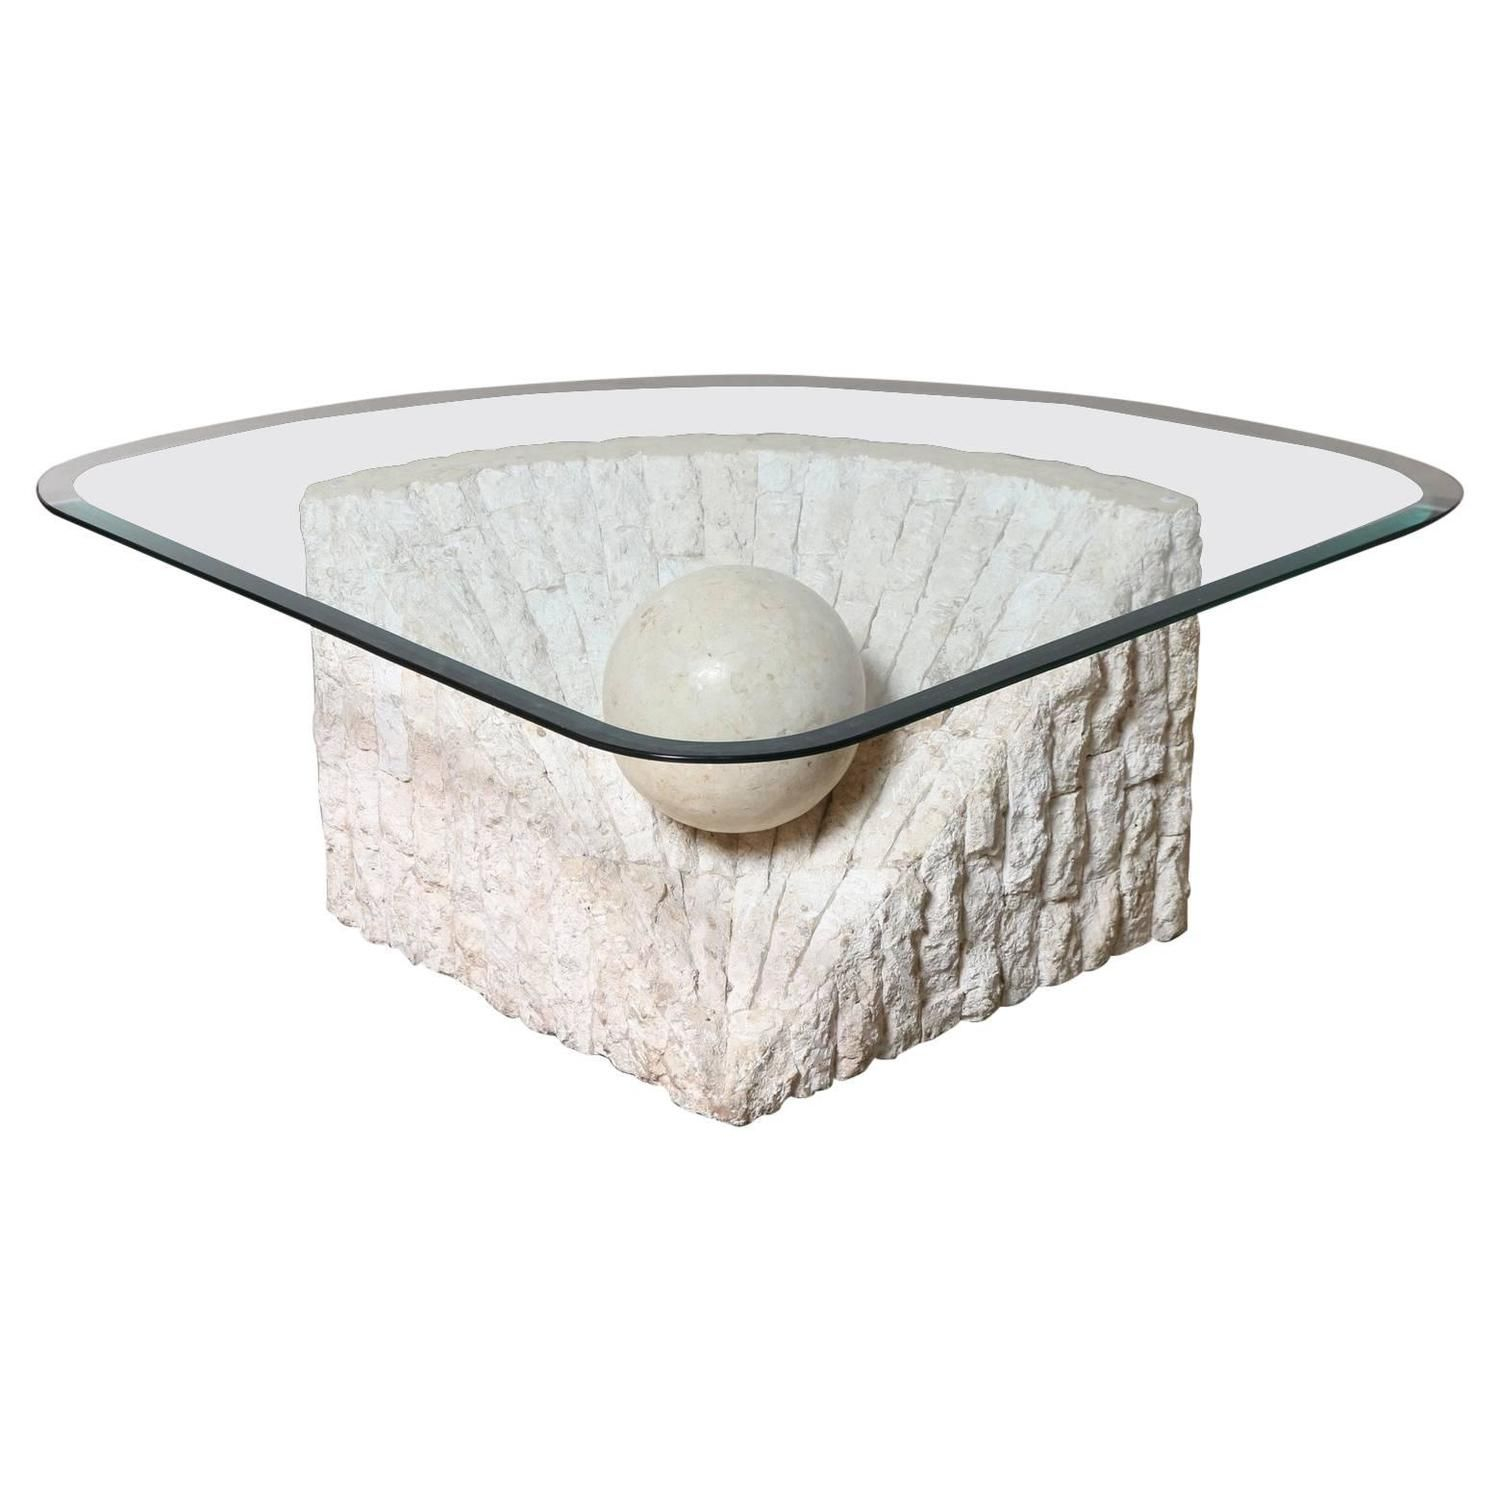 Triangular Marble And Travertine Coffee Table With Beveled Edge intended for size 1500 X 1500